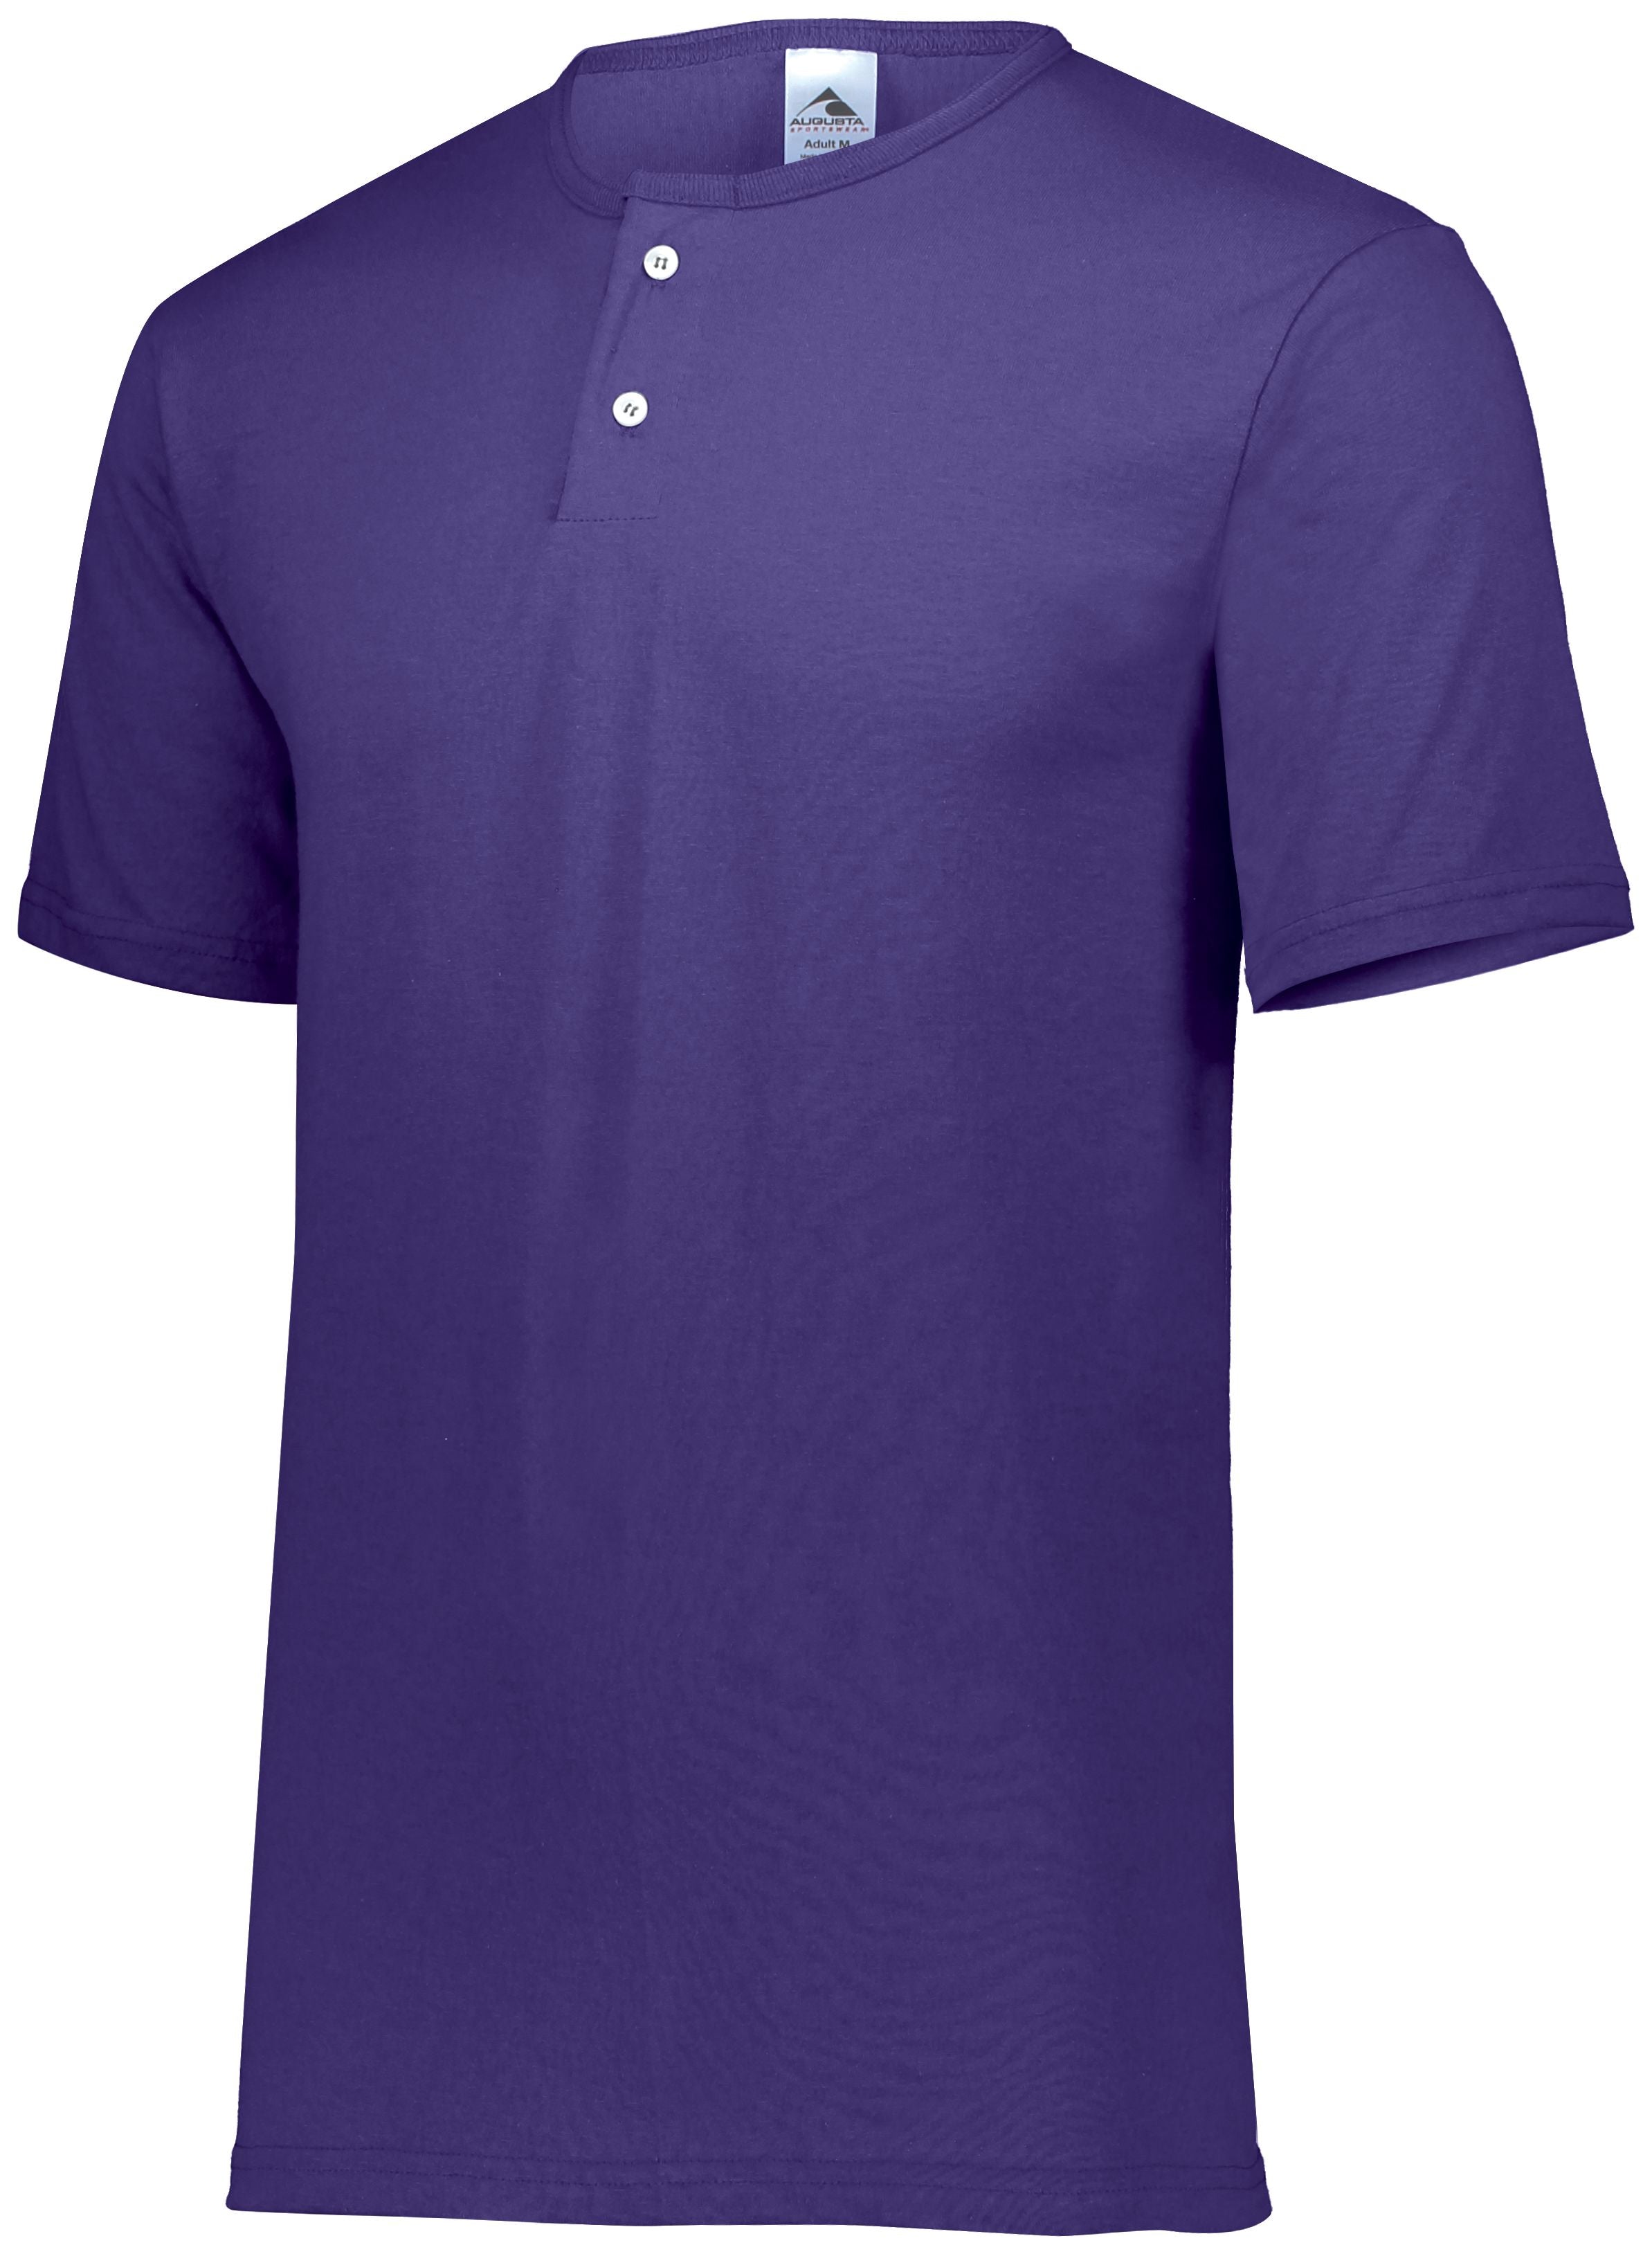 Augusta Sportswear Two-Button Baseball Jersey in Purple  -Part of the Adult, Adult-Jersey, Augusta-Products, Baseball, Shirts, All-Sports, All-Sports-1 product lines at KanaleyCreations.com